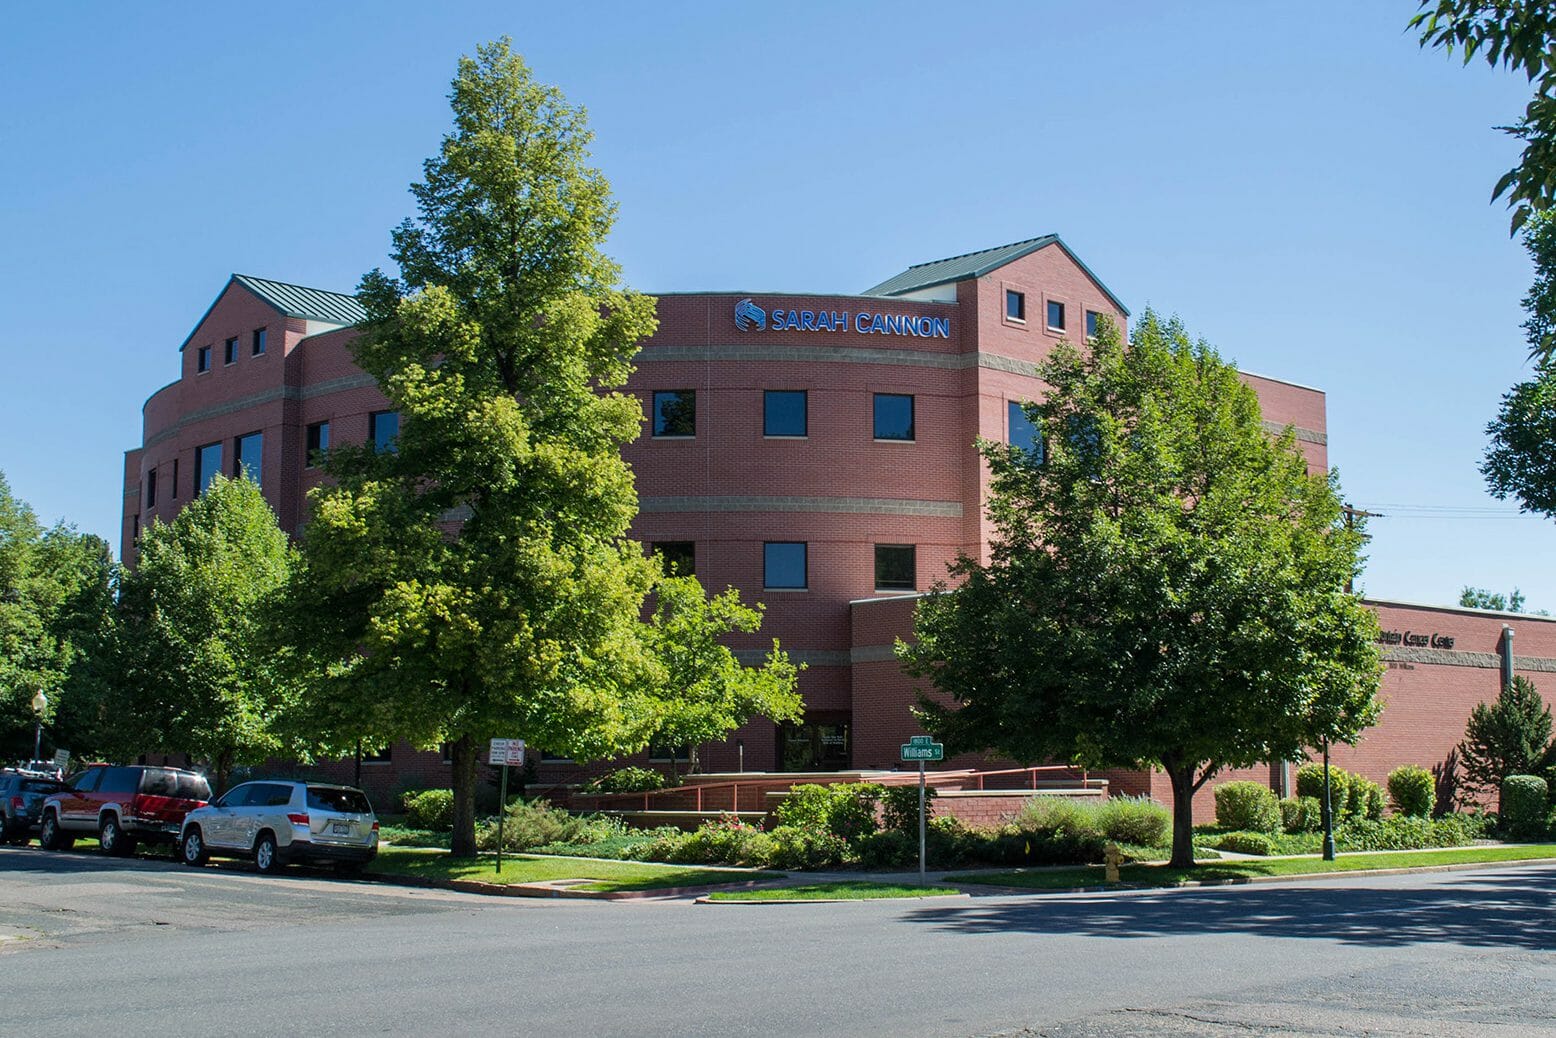 View of brick exterior of Rocky Mountain Cancer Center with sarah cannon research institute logo on top of building from across the street